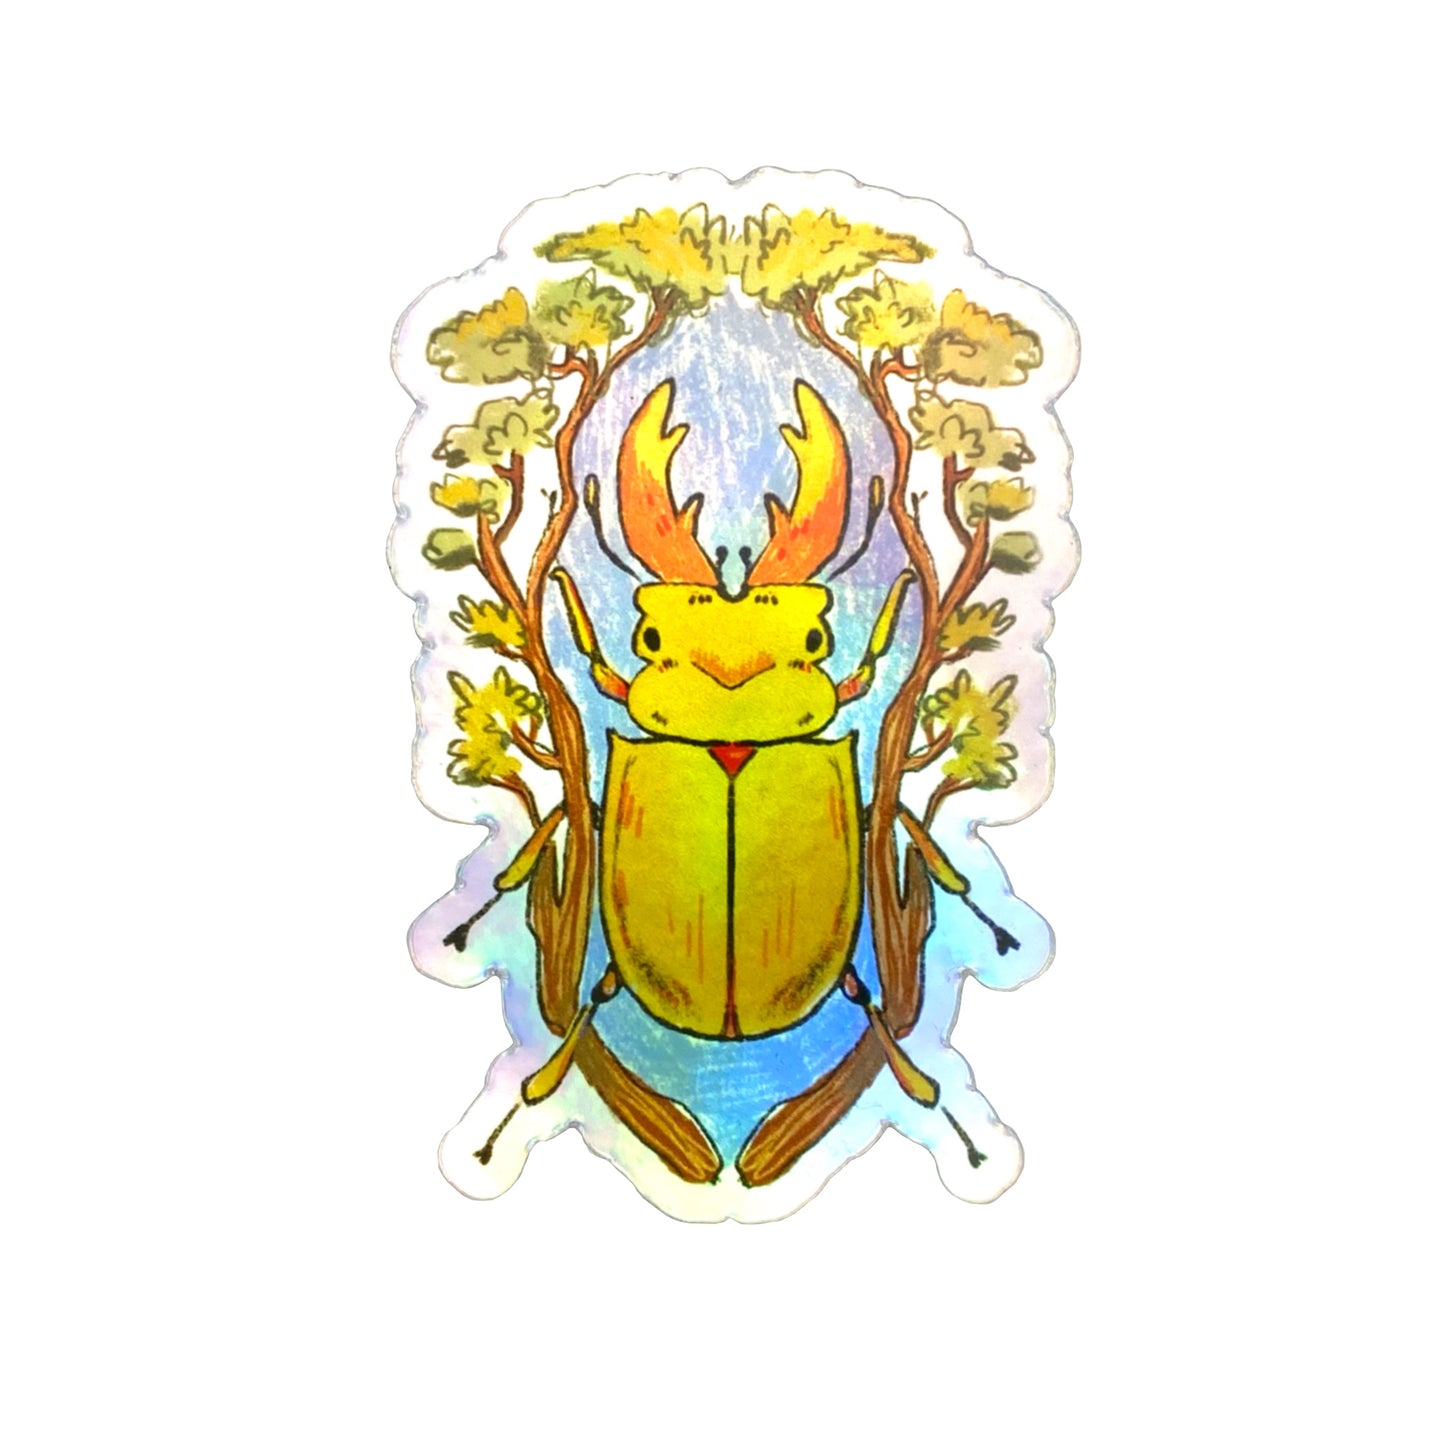 Holographic Beetle Sticker by Lois Songster - by Lois Songster - K. A. Artist Shop